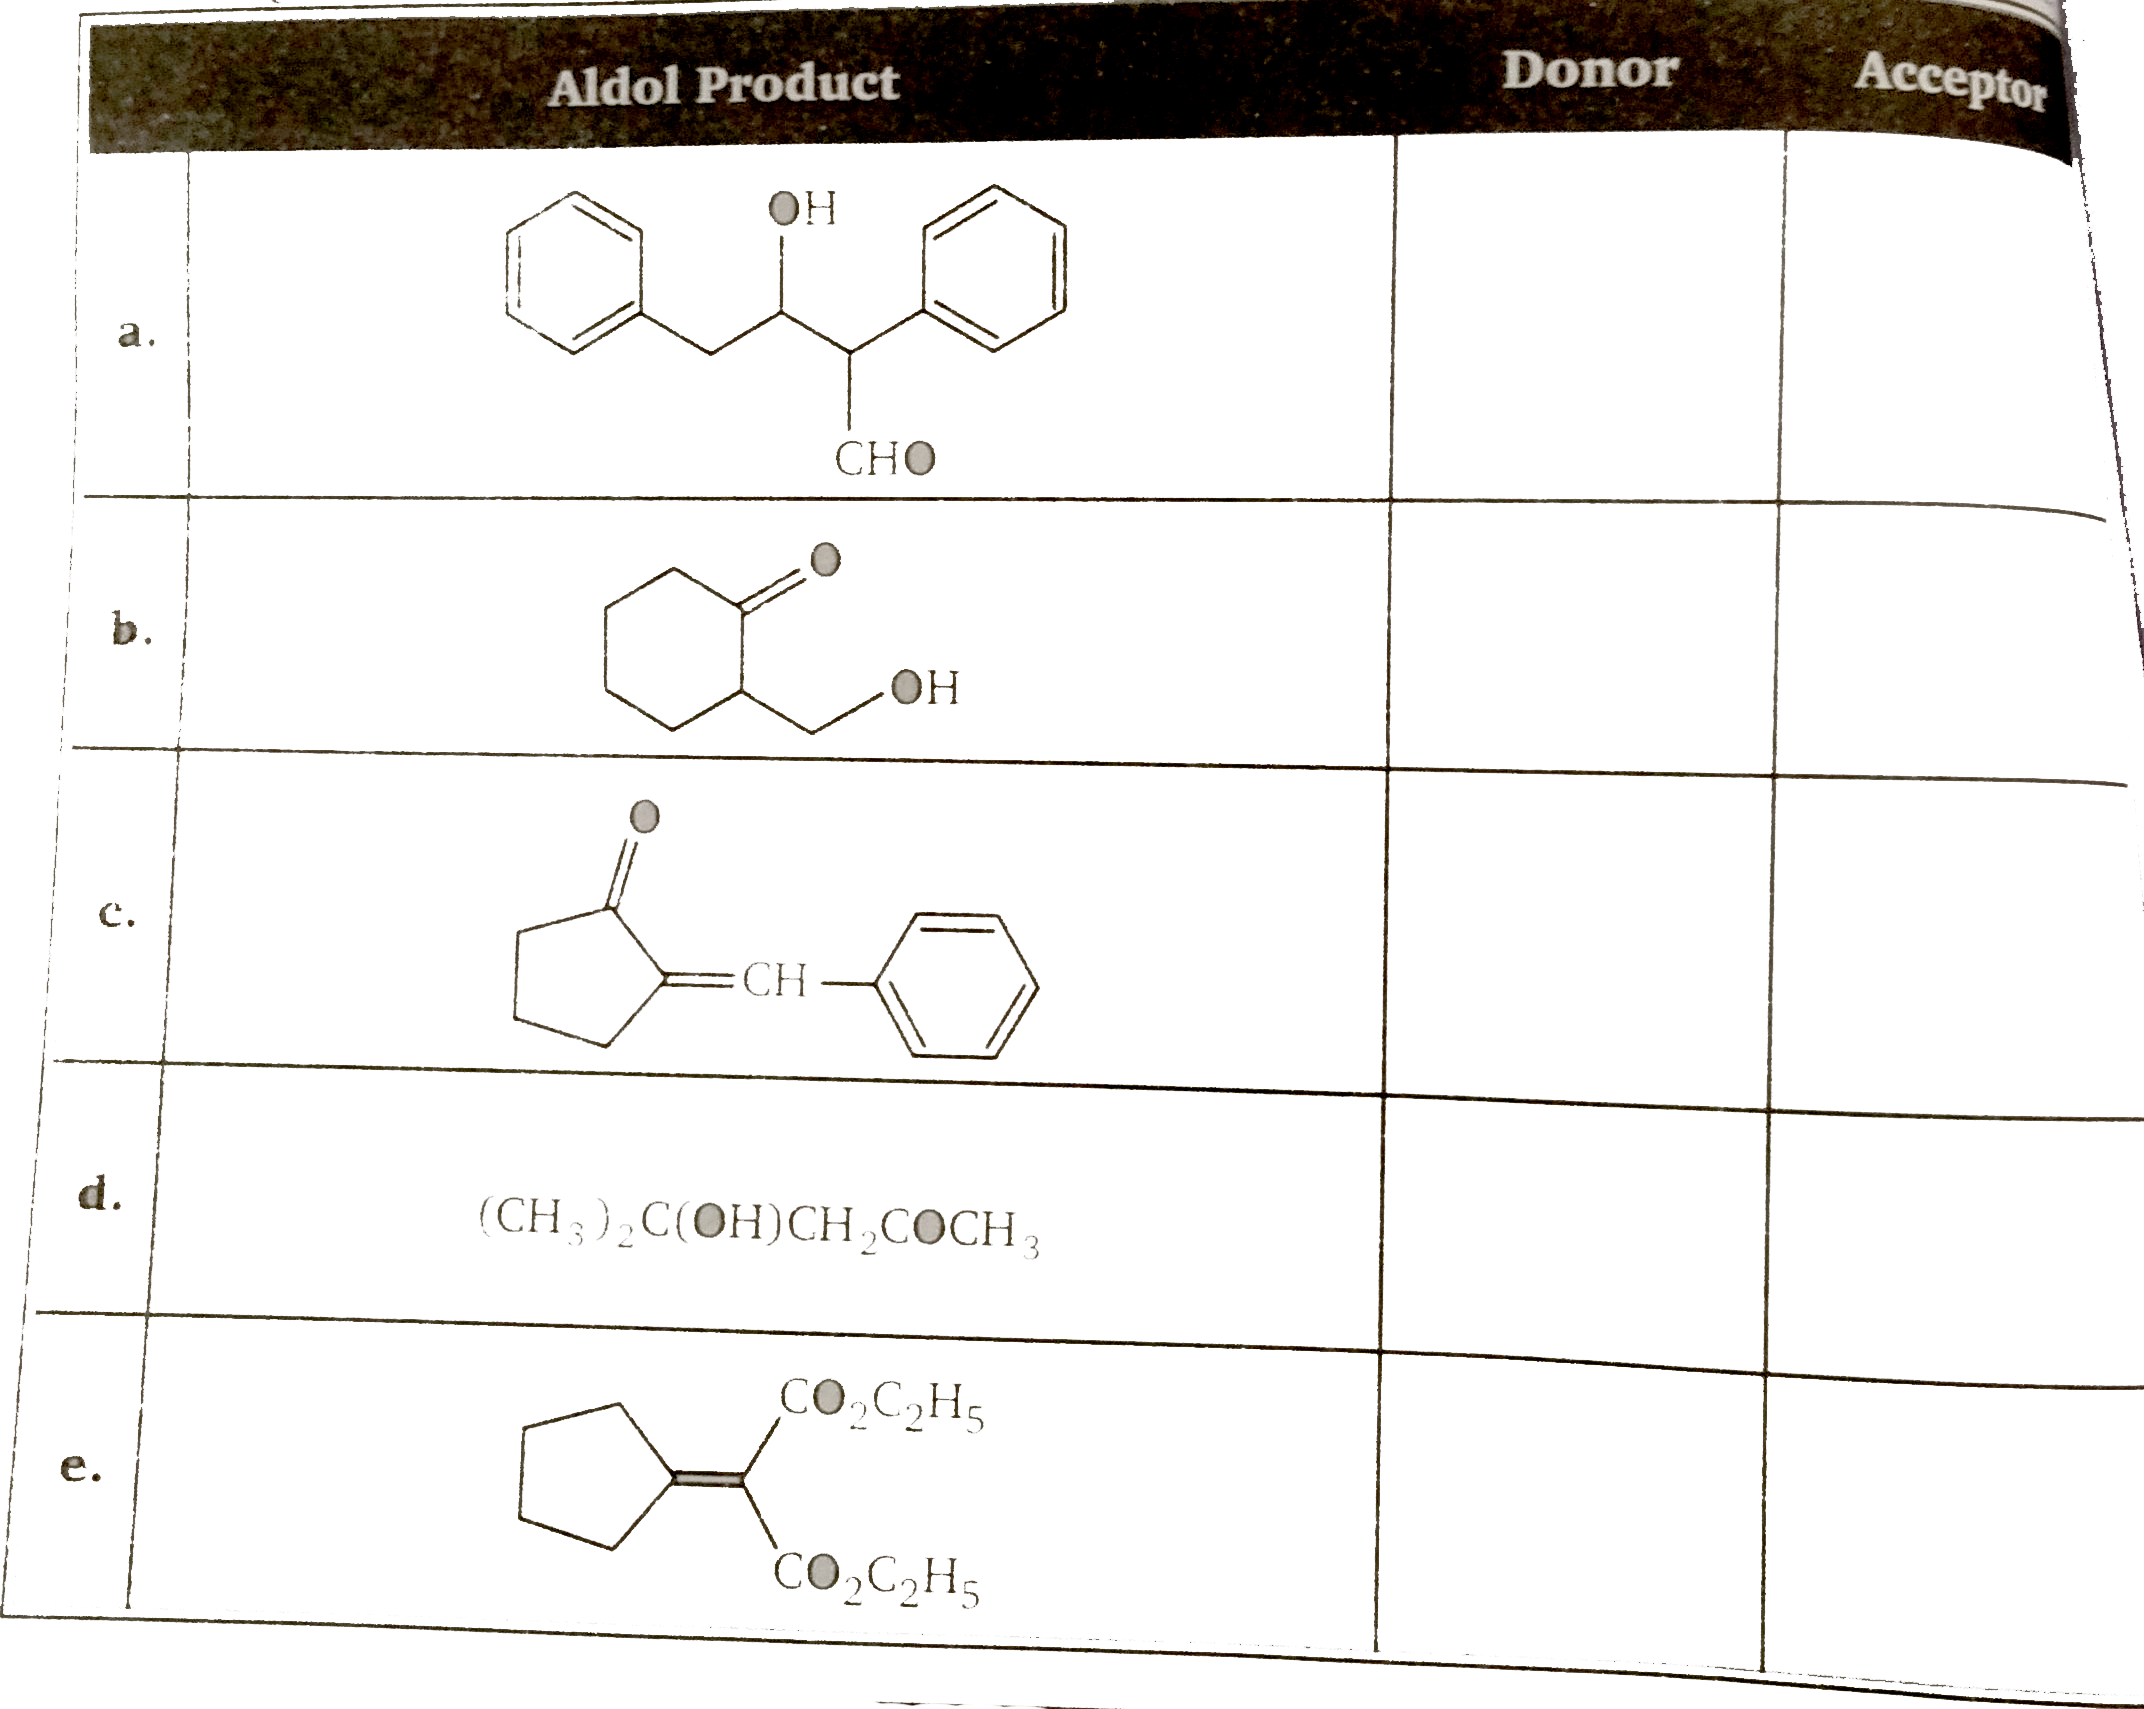 Aldol condensation proceeds by carbon-carbon bond formation between an enolate donor and a carbonyl acceptor. For each of the  following aldol products (a thorugh e) select a donor and an acceptor compound from the list at the bottom of the page (compounds A through H). write the letter corresponding to your selection in the appropriate answer box.   .   Q.